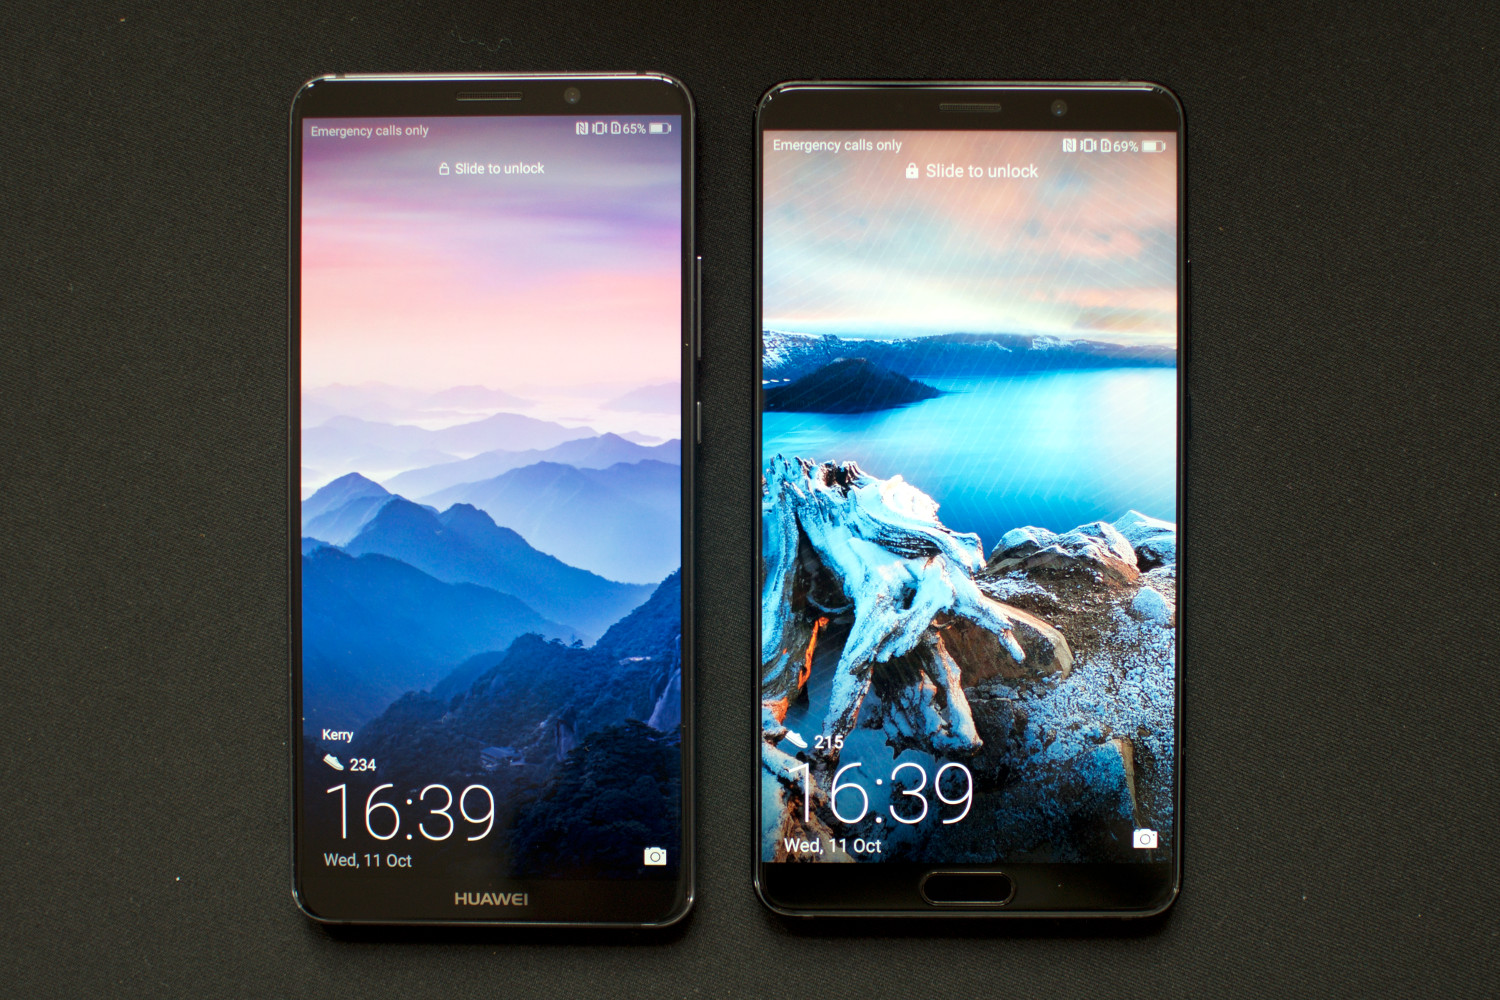 Huawei Mate 10 takes on Samsung and Google's big phones - CNET